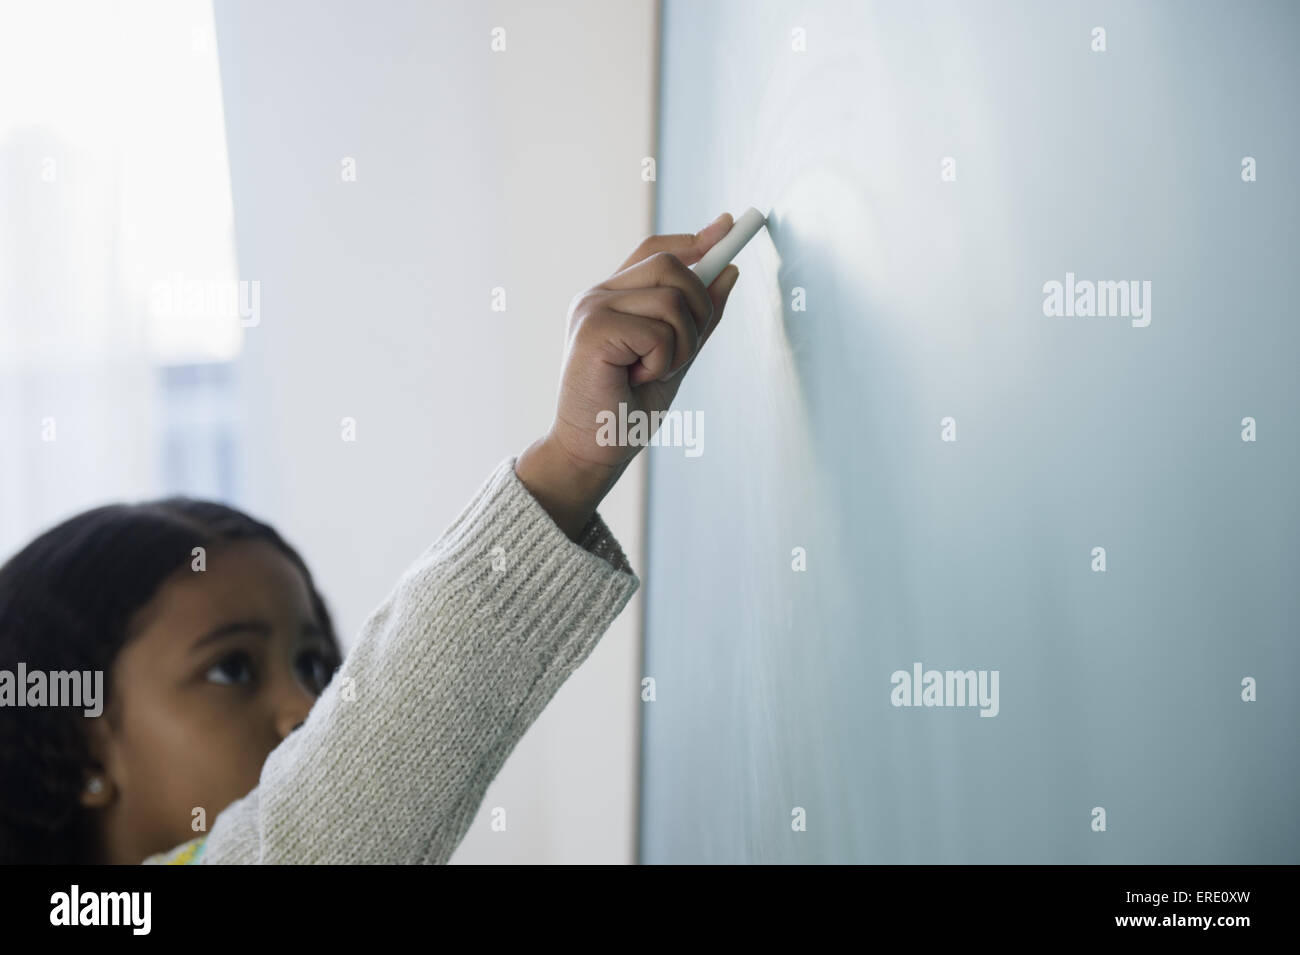 Mixed race student writing on chalkboard in classroom Stock Photo